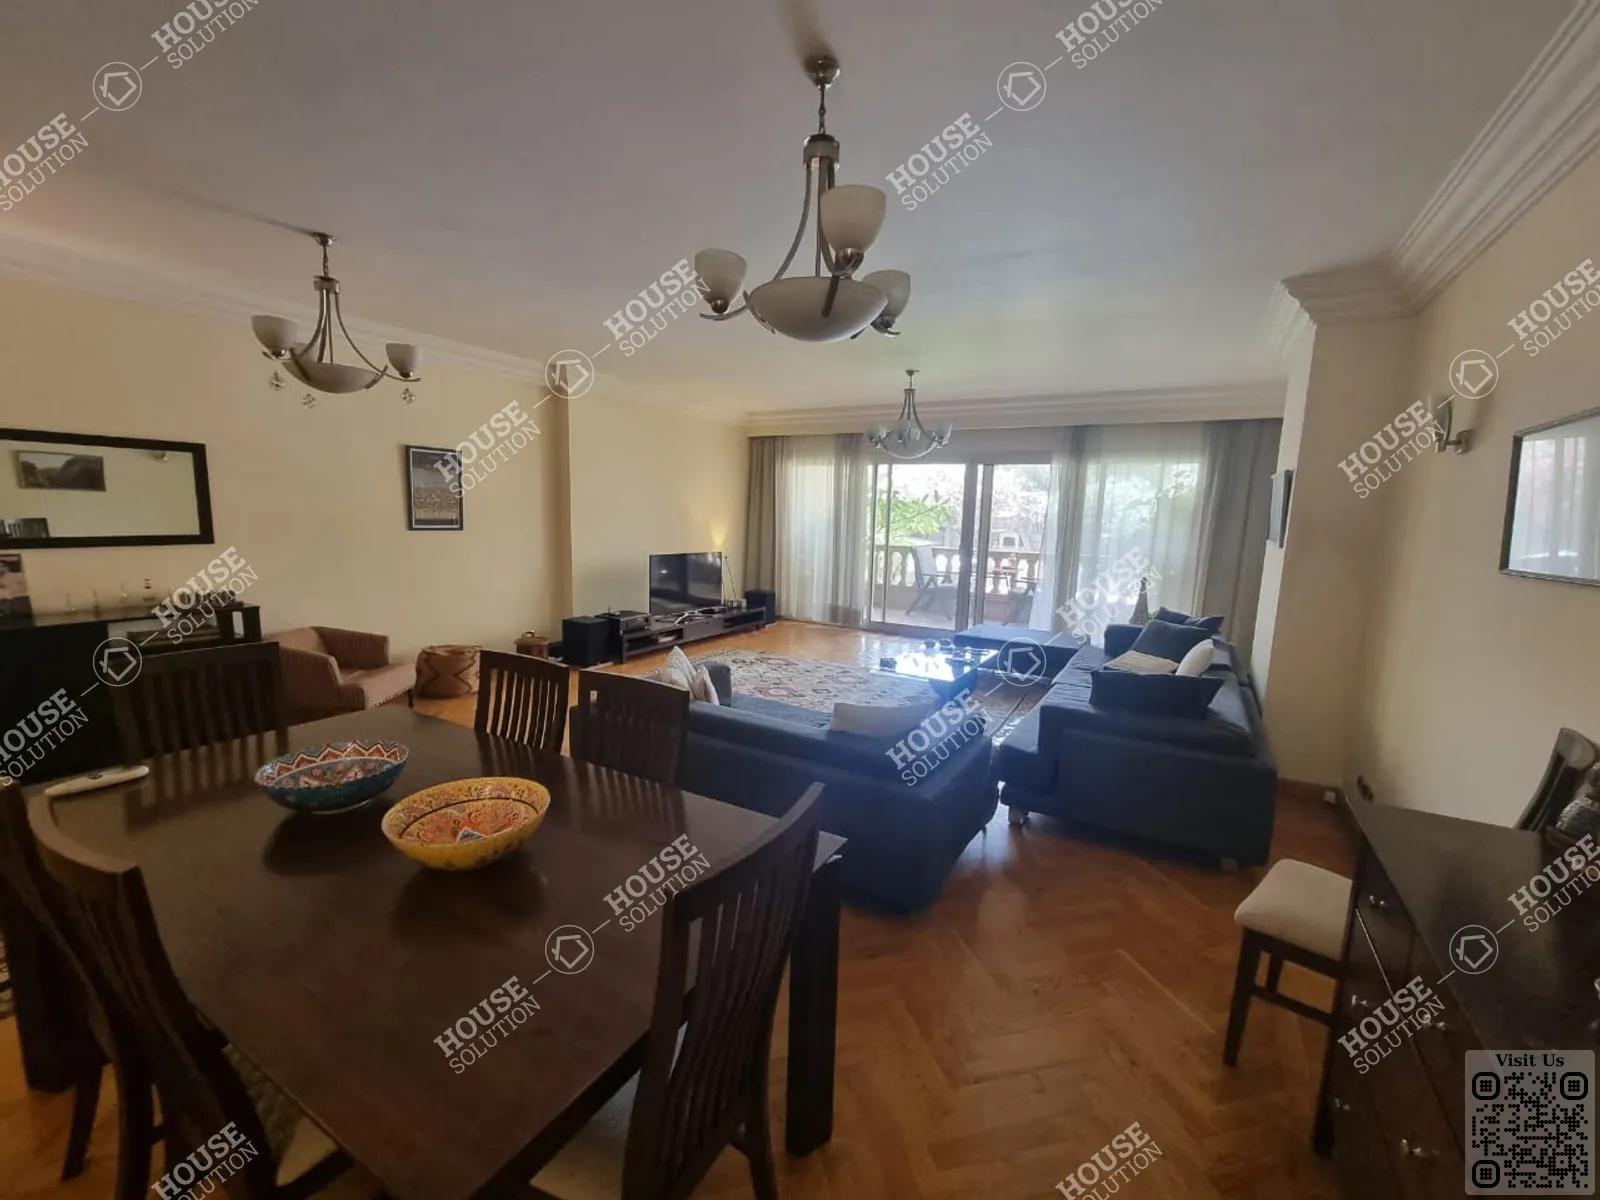 RECEPTION  @ Apartments For Rent In Maadi Maadi Sarayat Area: 265 m² consists of 4 Bedrooms 4 Bathrooms Modern furnished 5 stars #5675-0